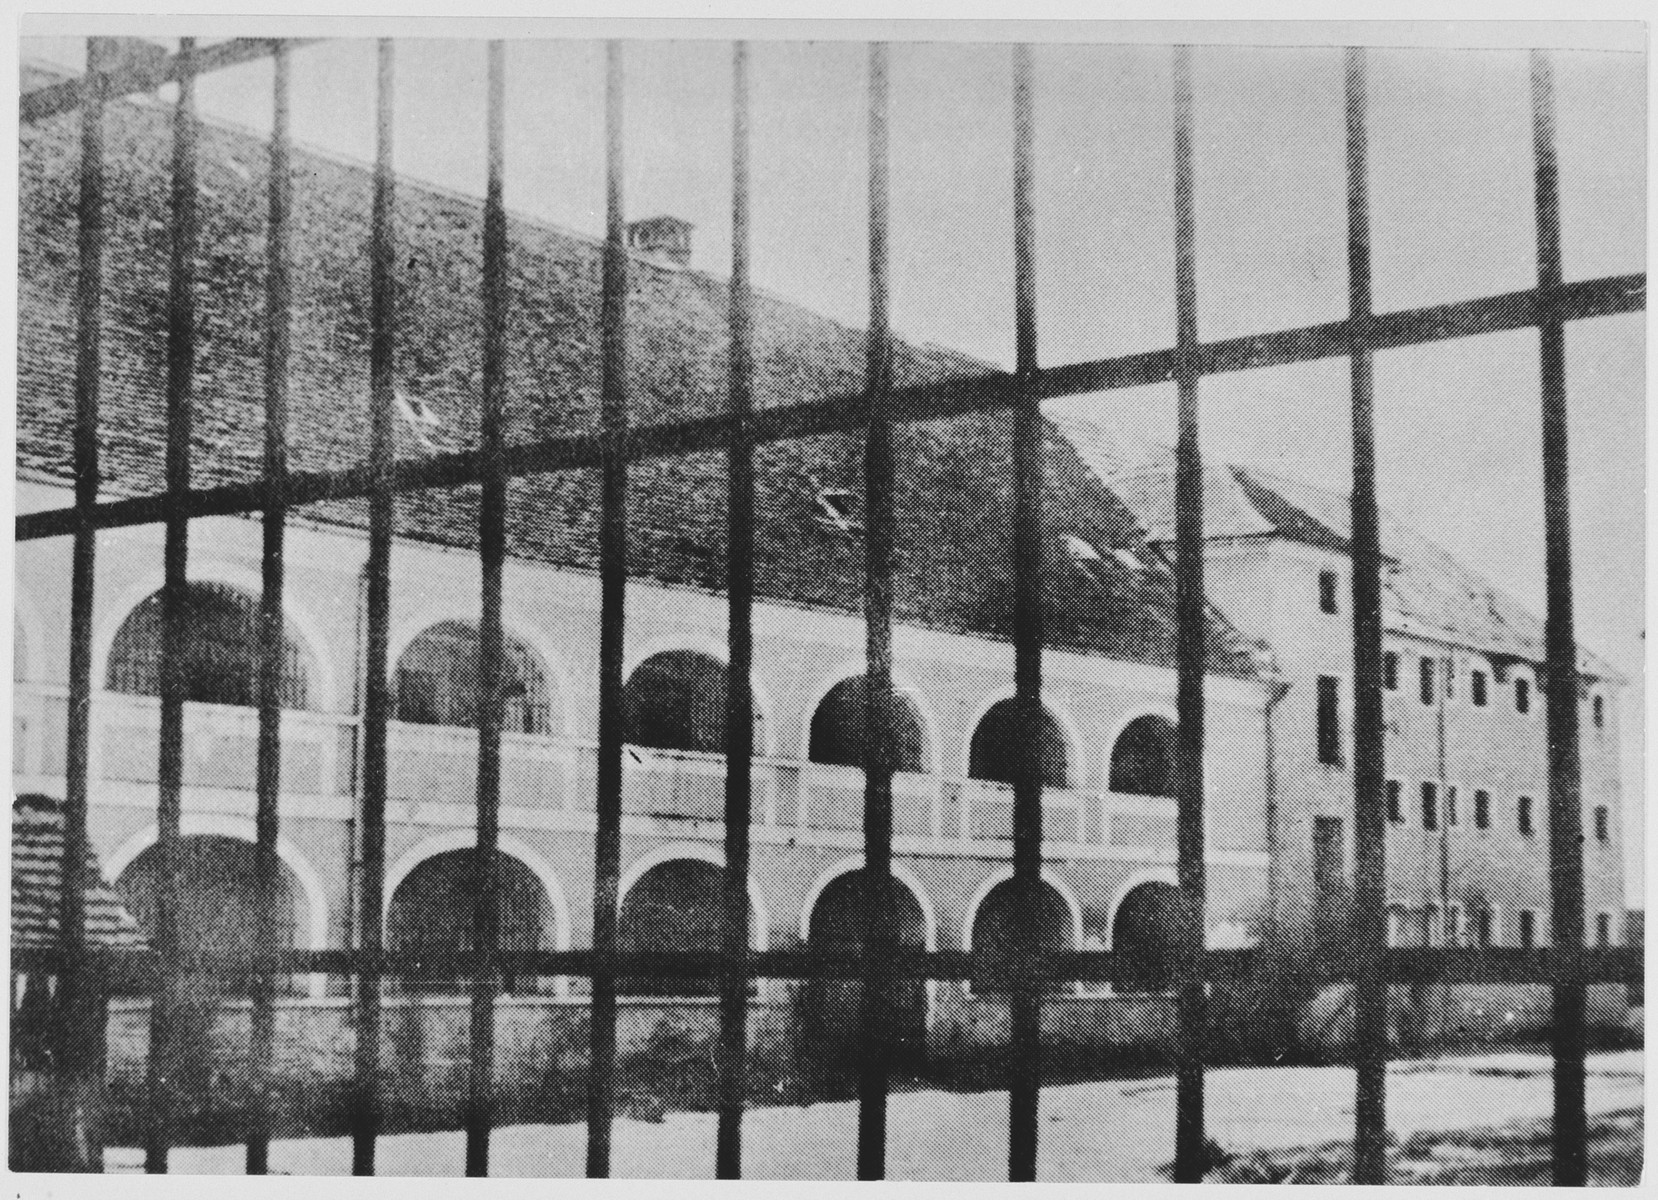 View through a tall fence of prisoner barracks in the men's camp at the Stara Gradiska concentration camp.

At the left are quarters for Jewish and Serbian inmates; at the right, for Croats, Muslims and Catholics.